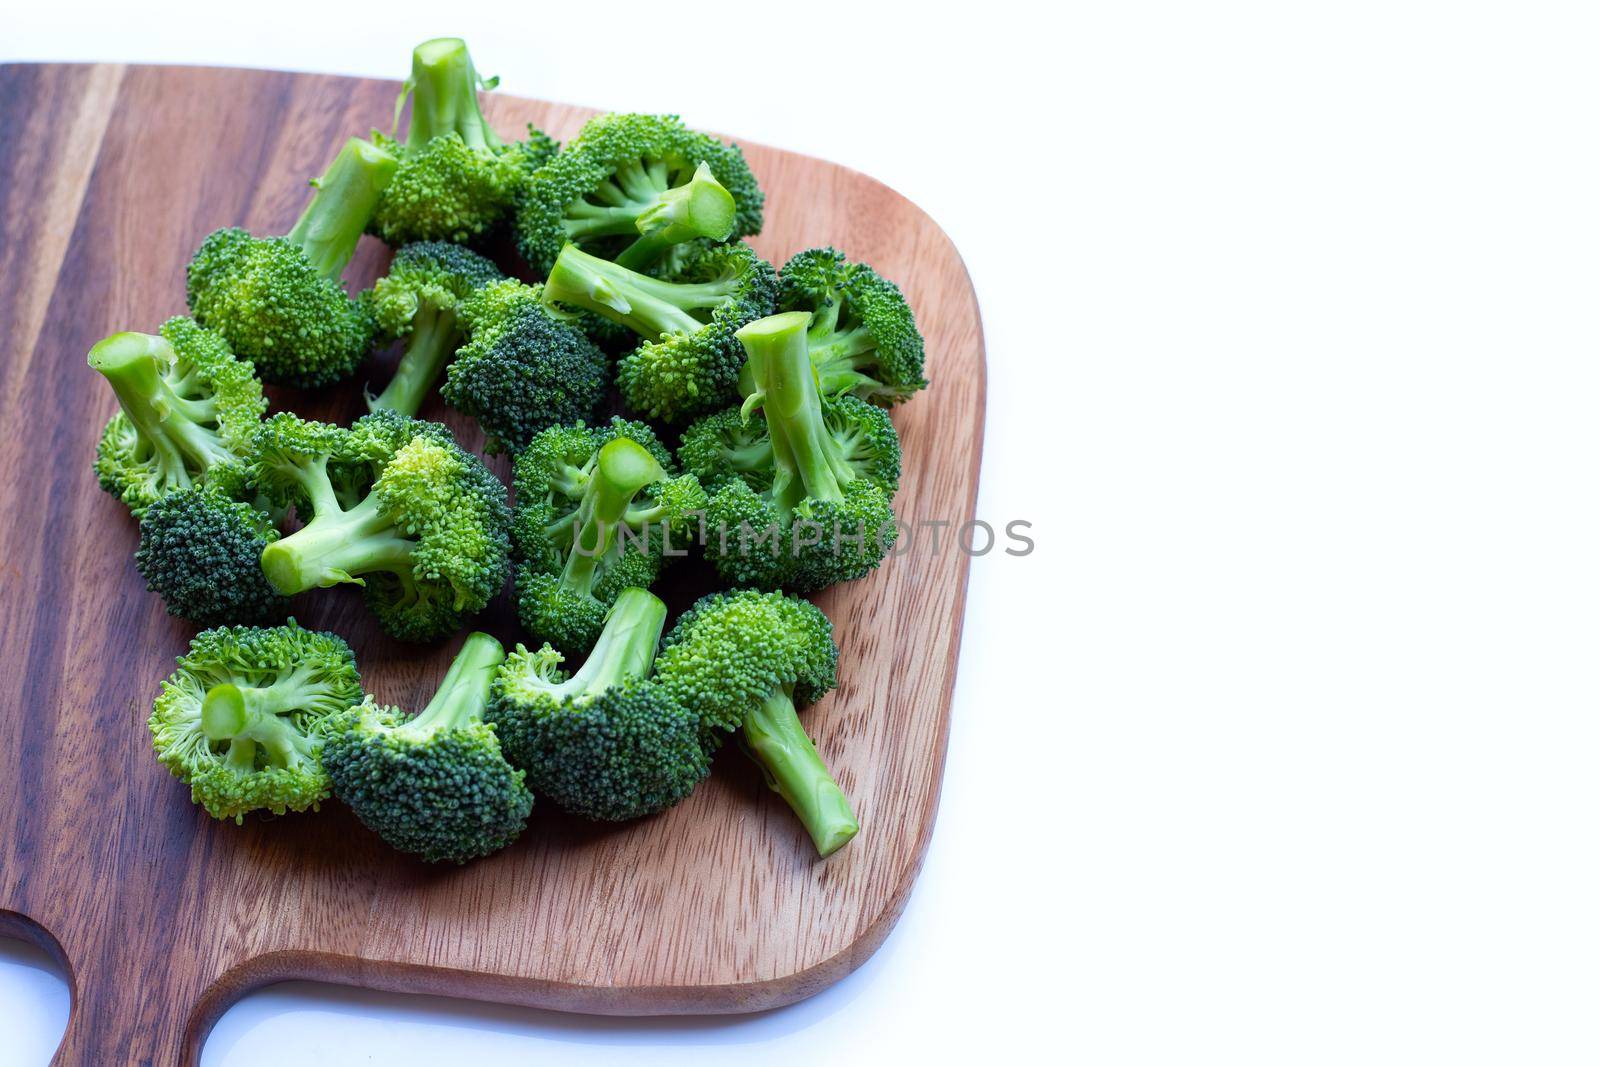 Fresh green broccoli on wooden cutting baound on white background.